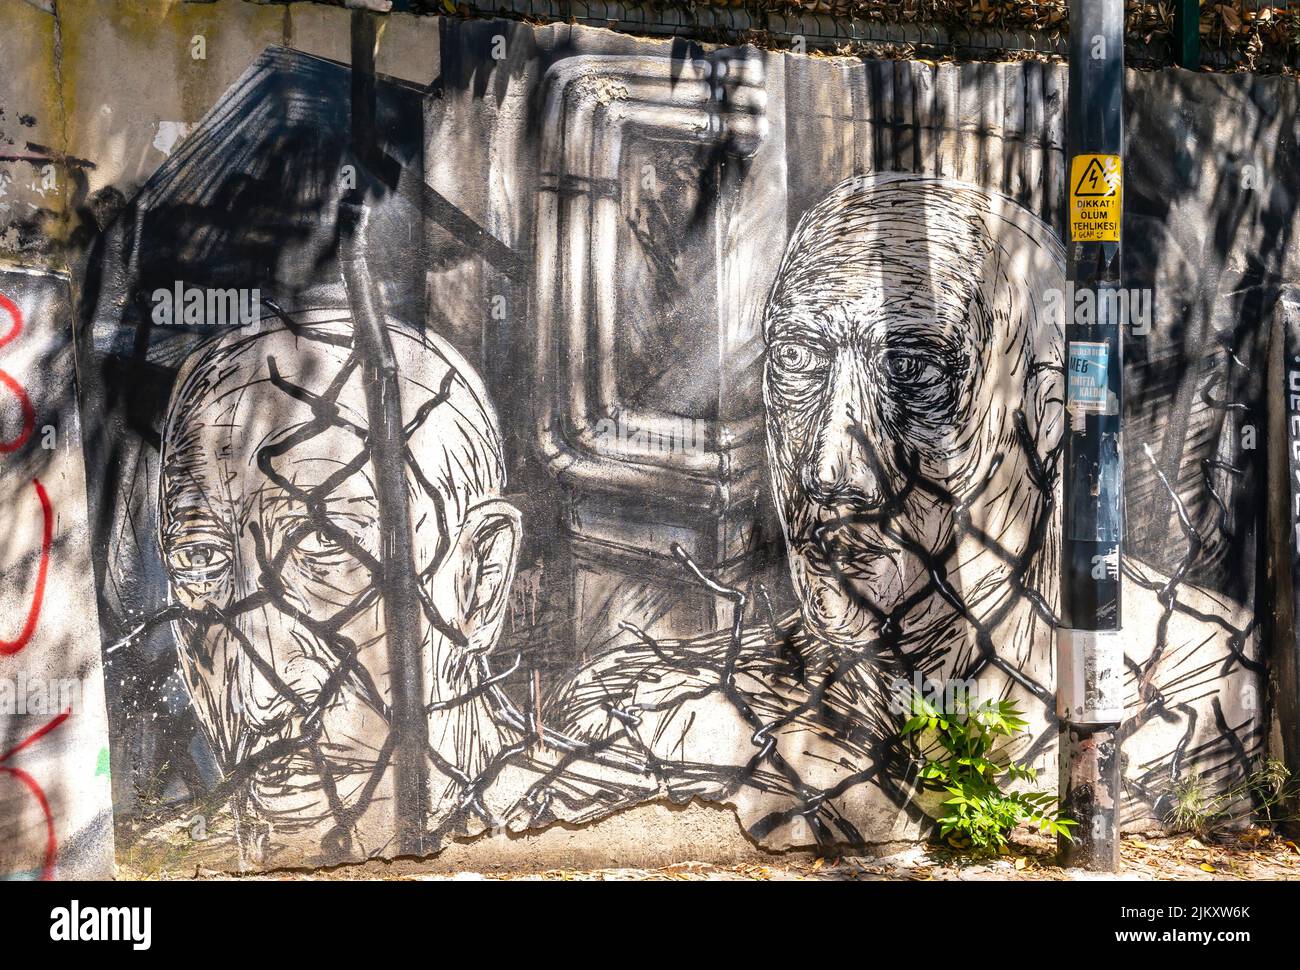 Street art, mural by Canavar depicting two men behind a fence in Moda, Kadiköy district of Istanbul, Turkey Stock Photo